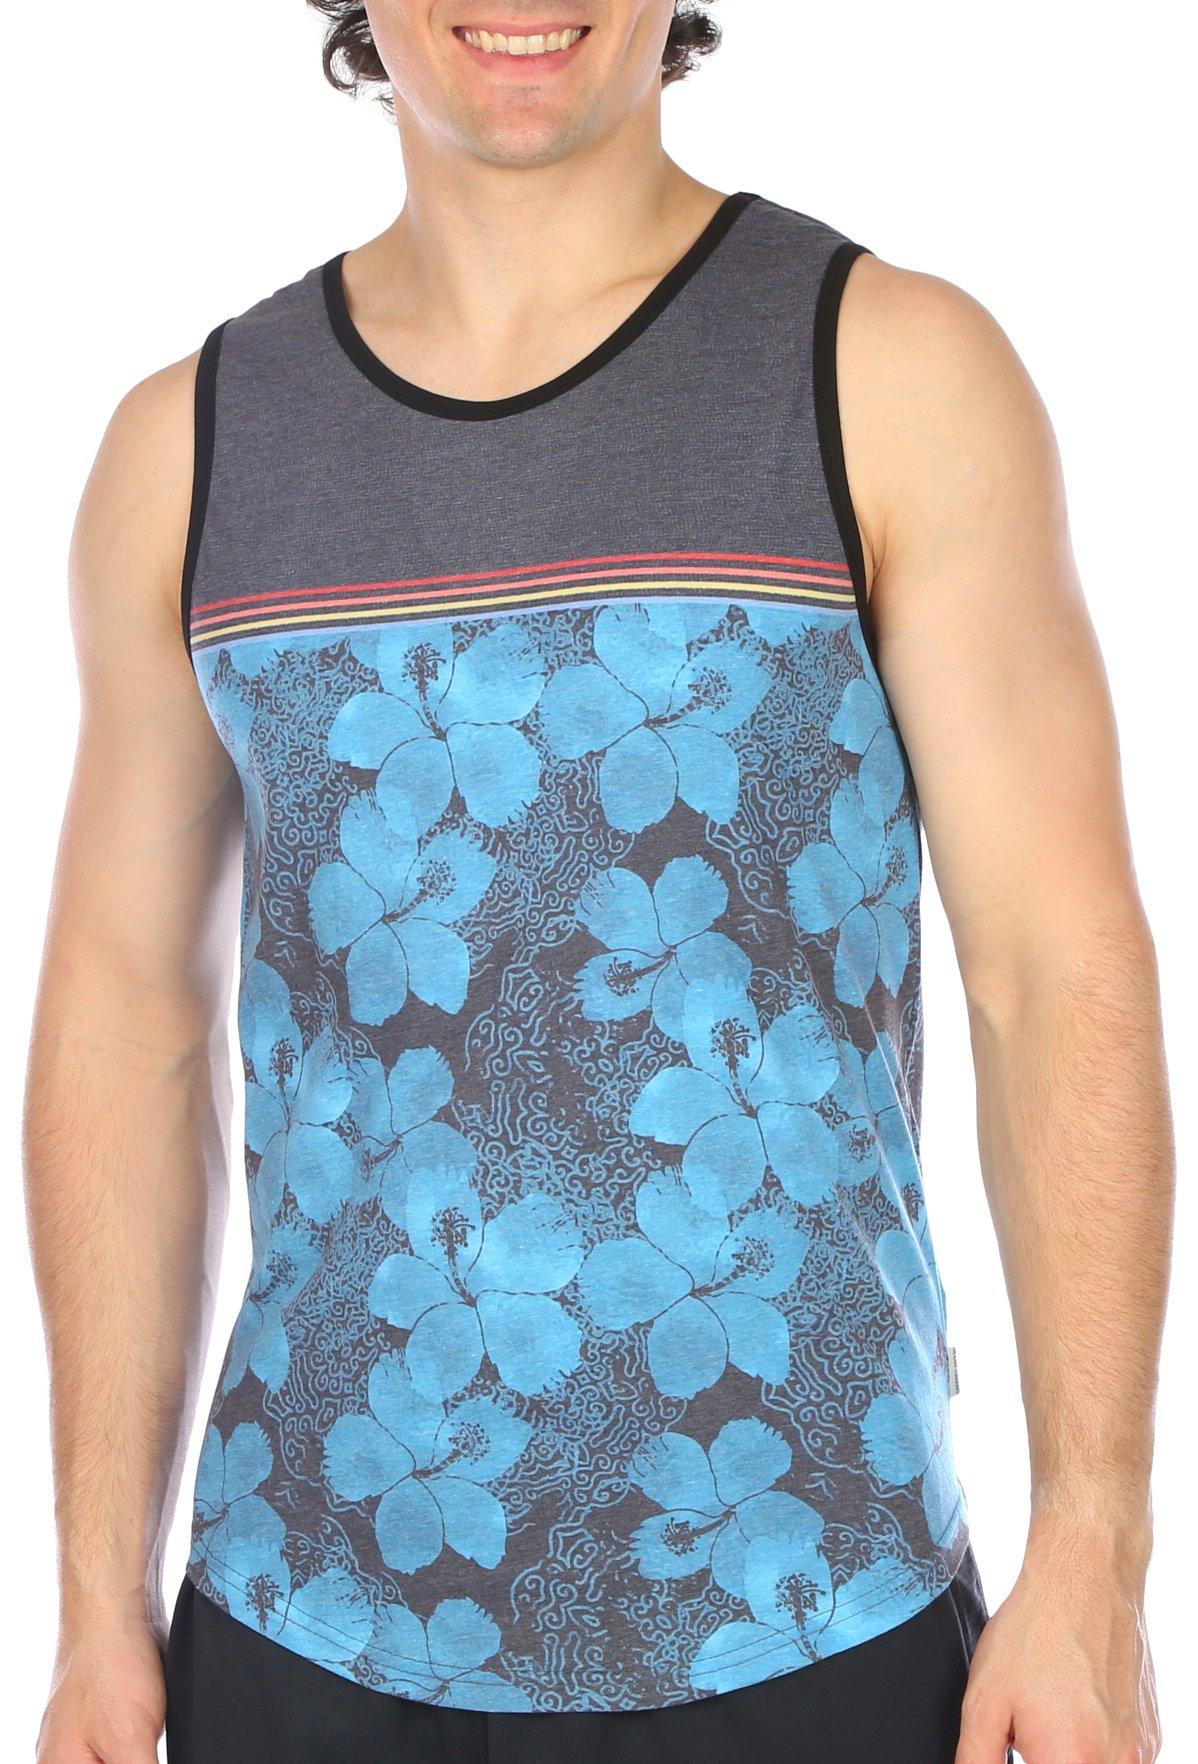 Ocean Current Mens Jeremy Muscle Tank Top